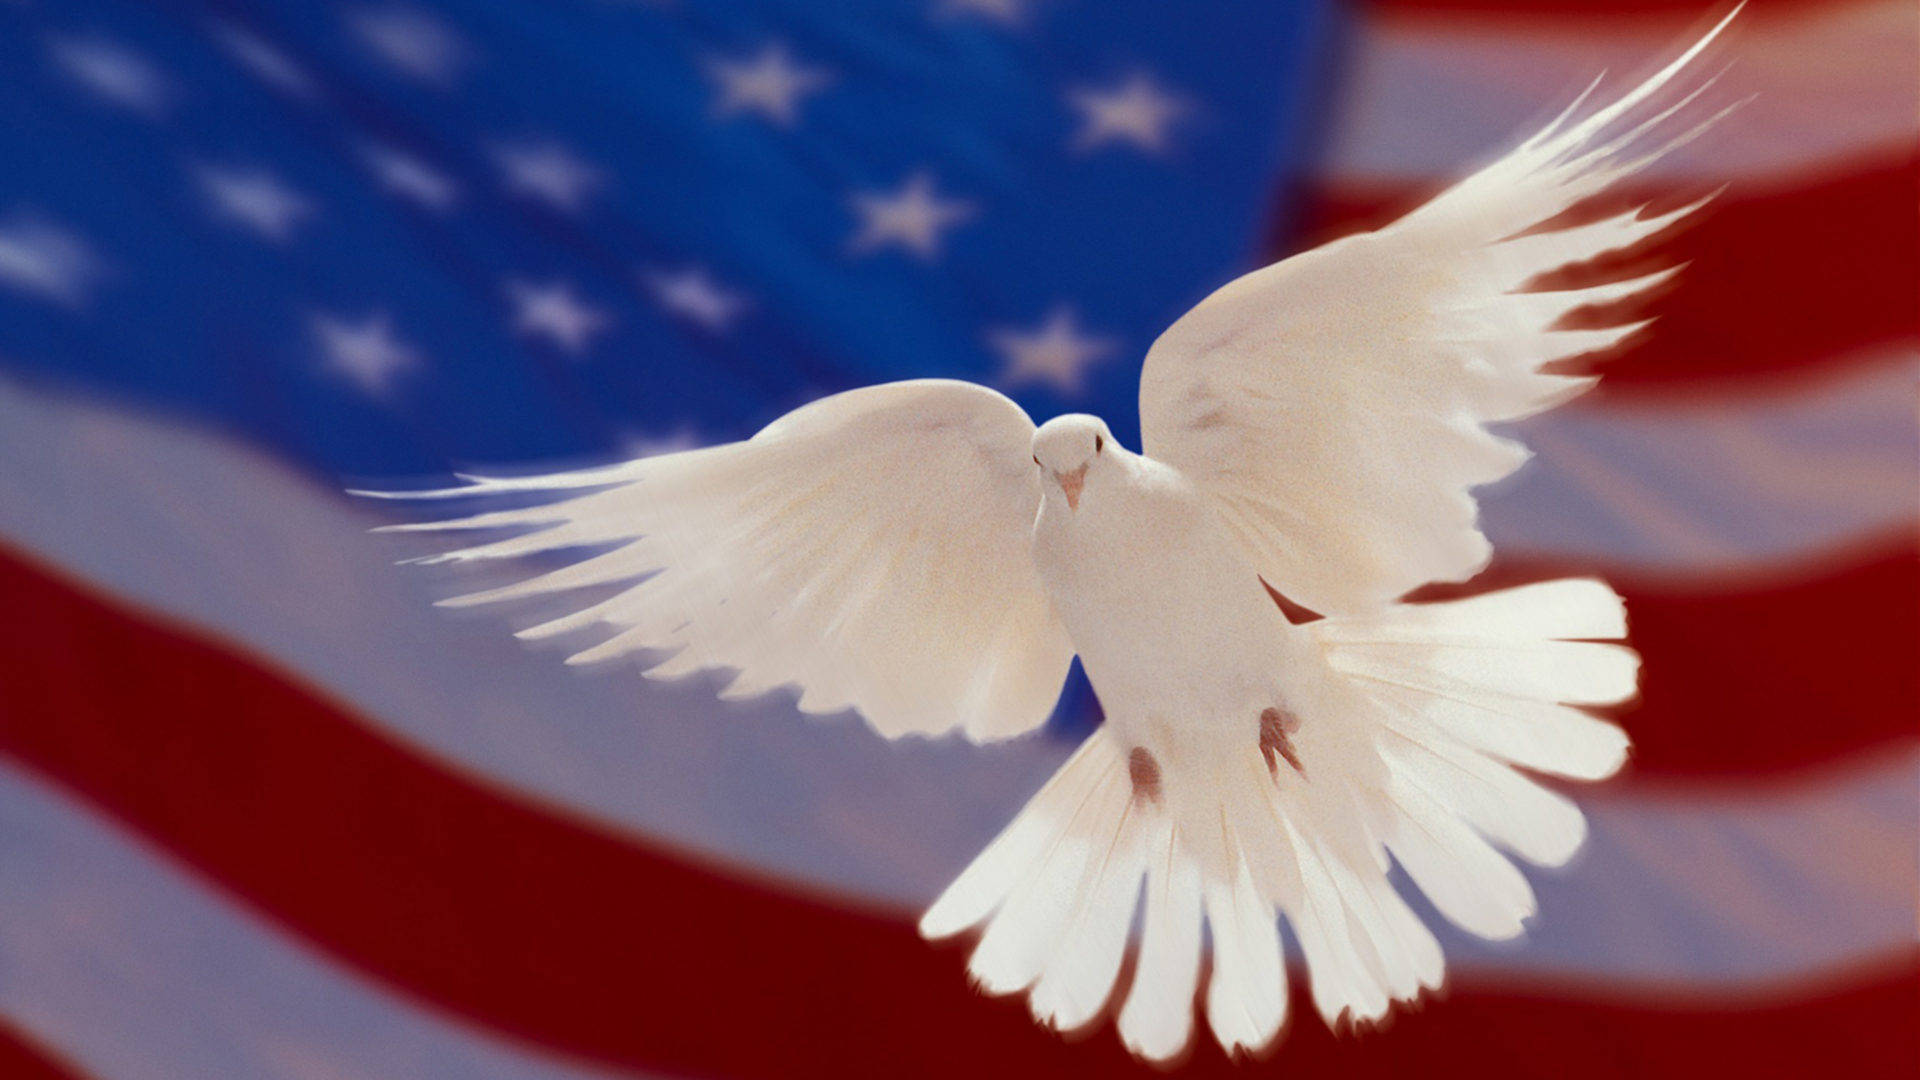 American Flag Hd With Dove Wallpaper